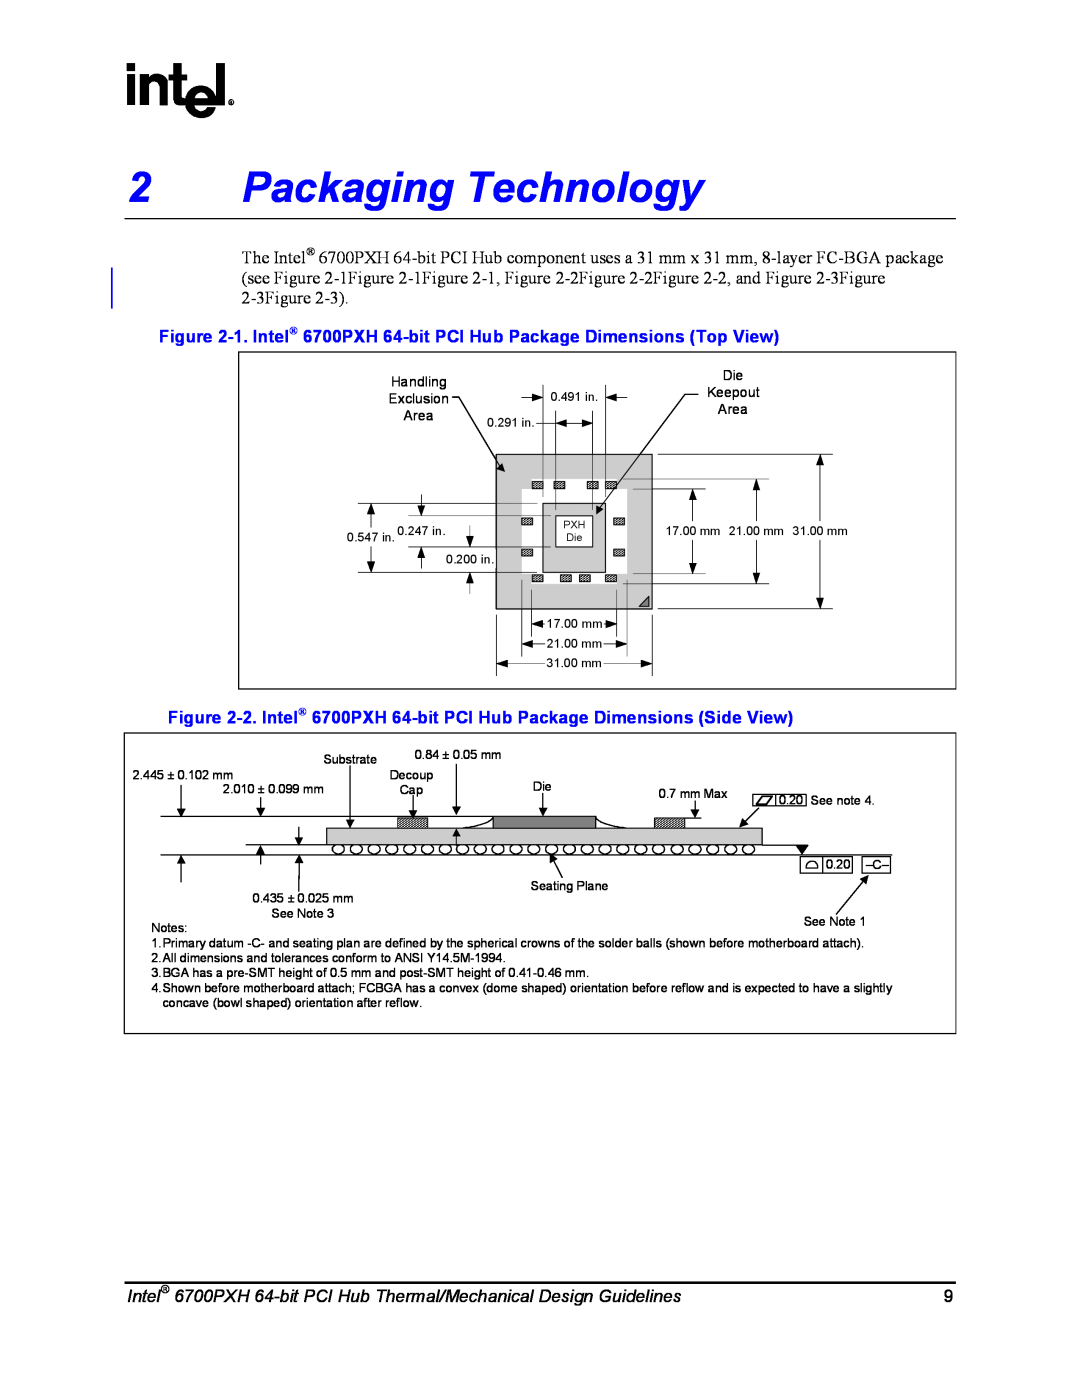 Intel Packaging Technology, 1. Intel 6700PXH 64-bit PCI Hub Package Dimensions Top View, Handling, Keepout, Exclusion 